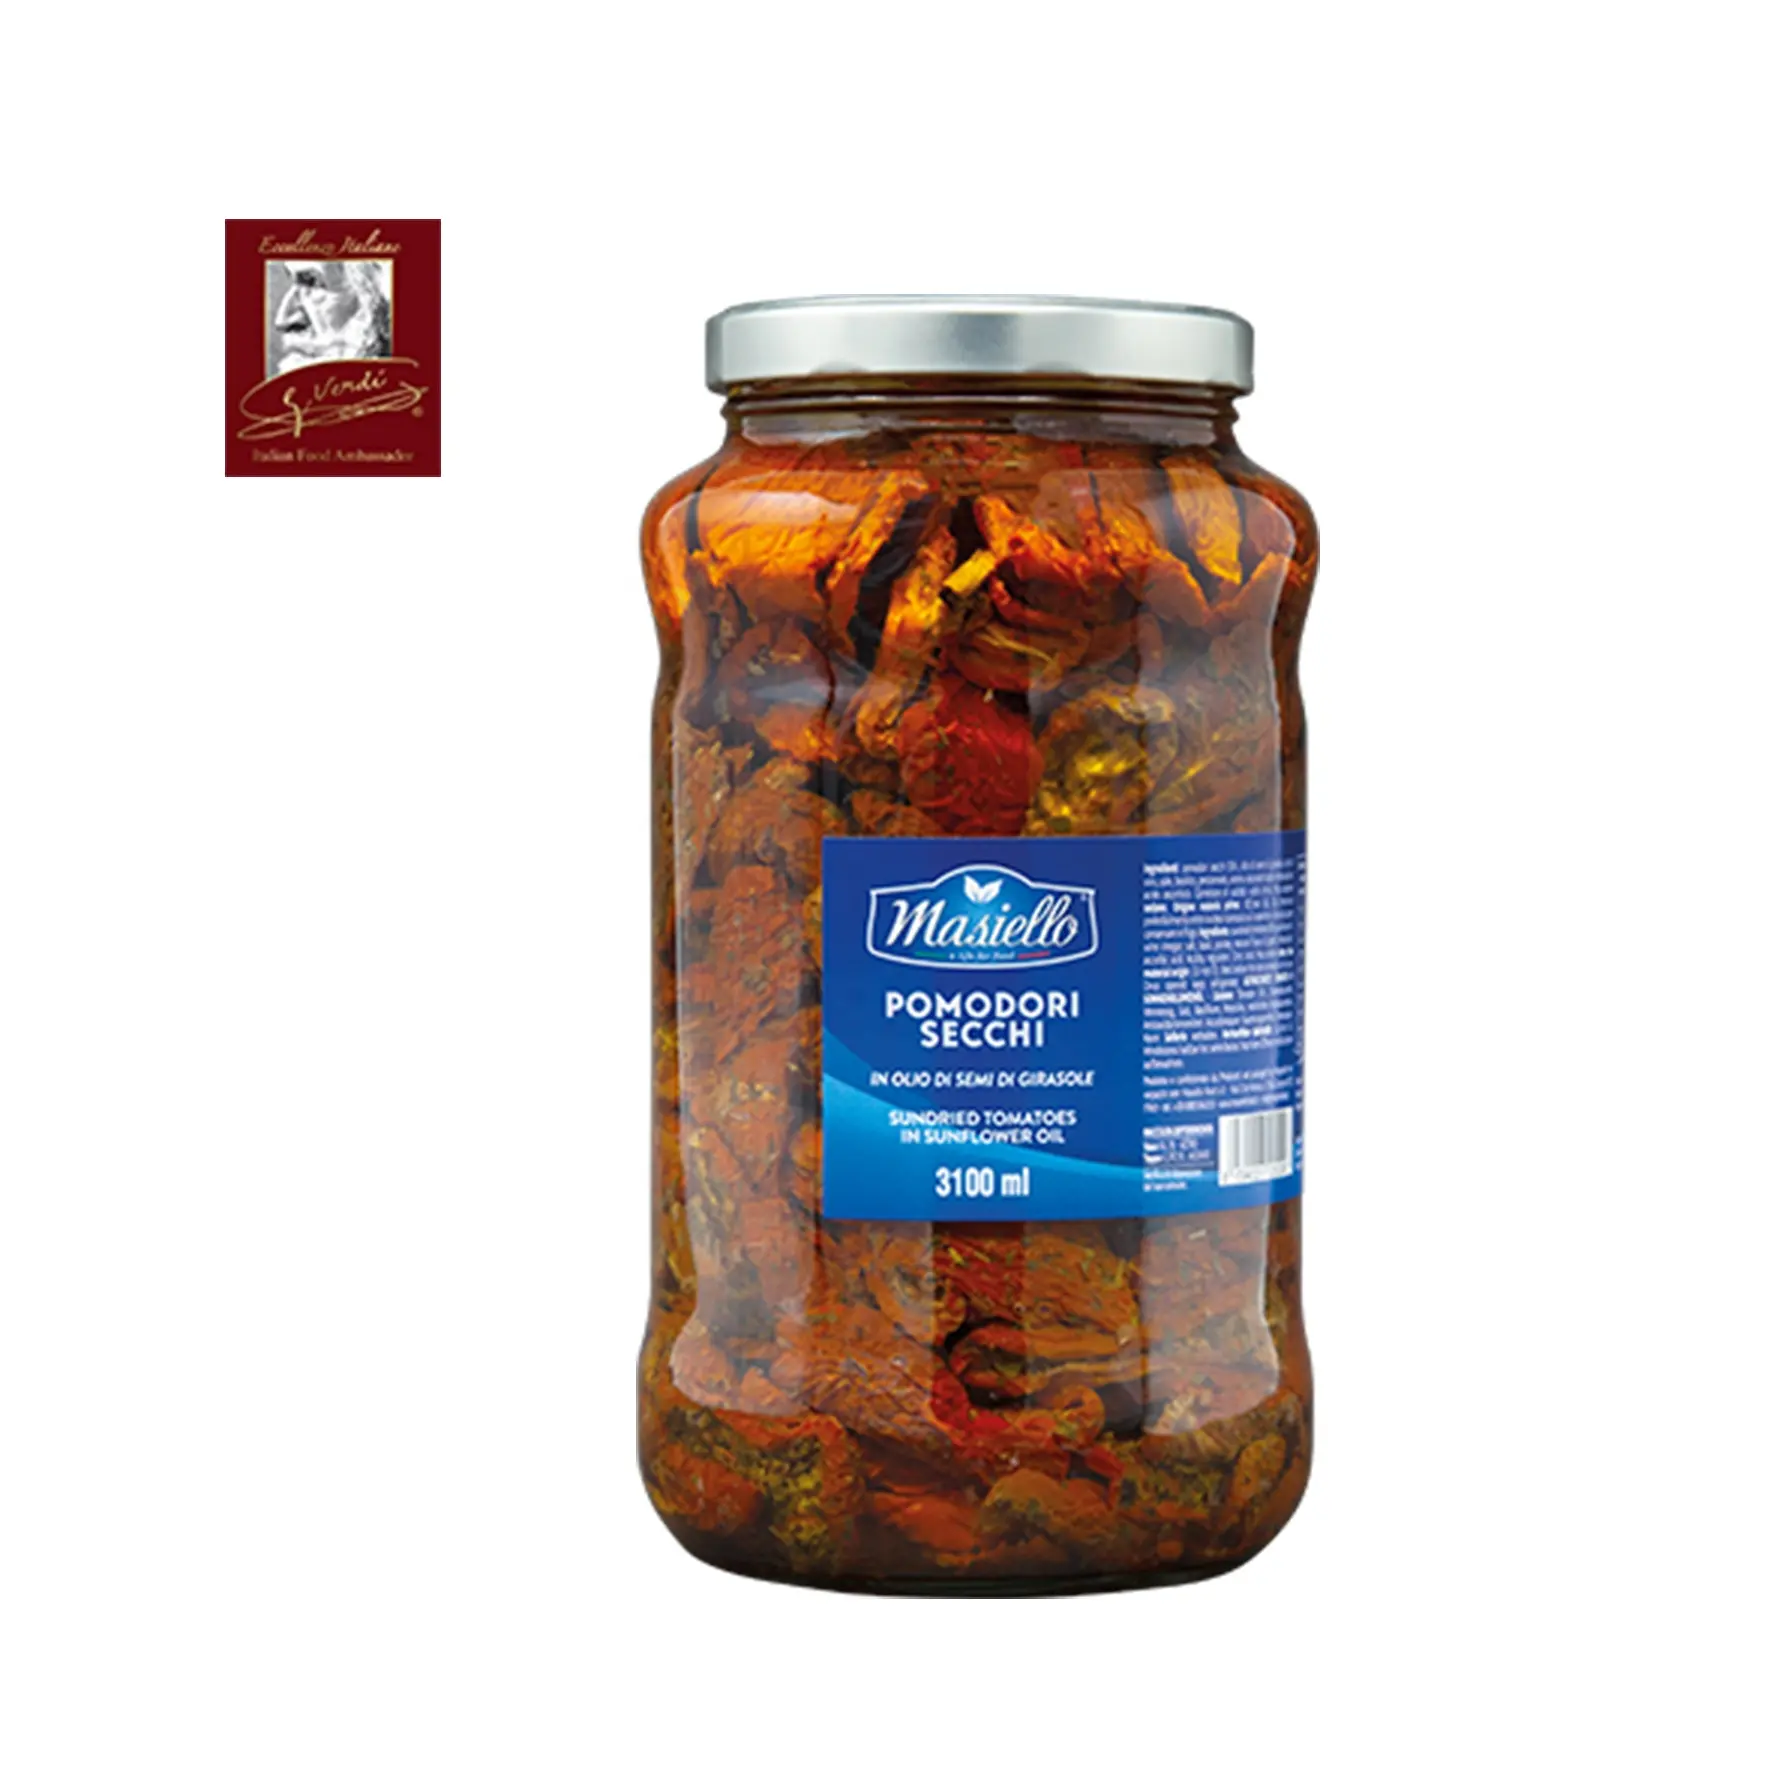 Sundried Tomatoes in Sunflower Oil 2.8Kg GVERDI Selection Italian Food Condiments Appetizers Made in Italy